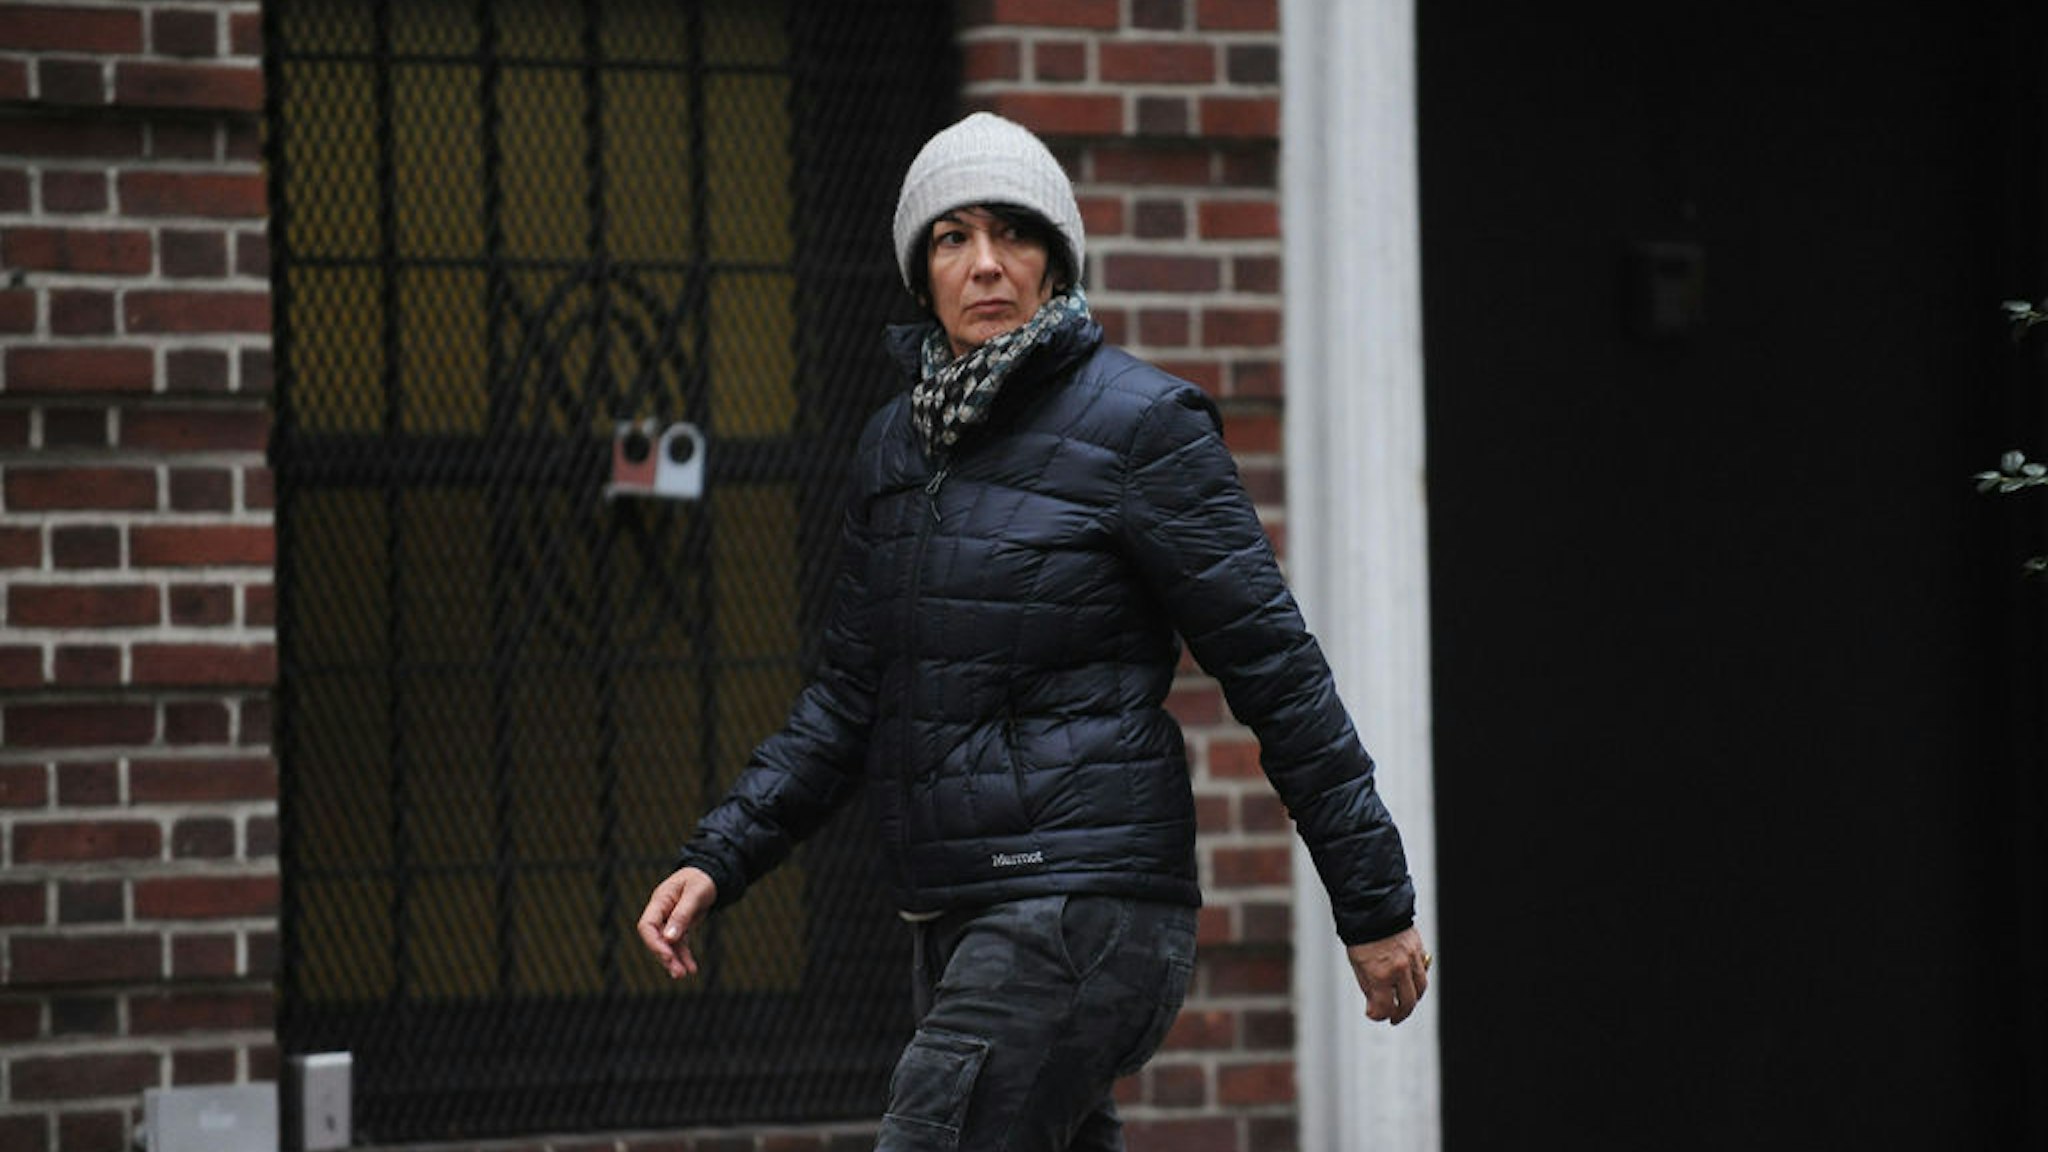 Ghislaine Maxwell, after walking out the side door of her townhouse in Manhattan on Jan. 4, 2015.